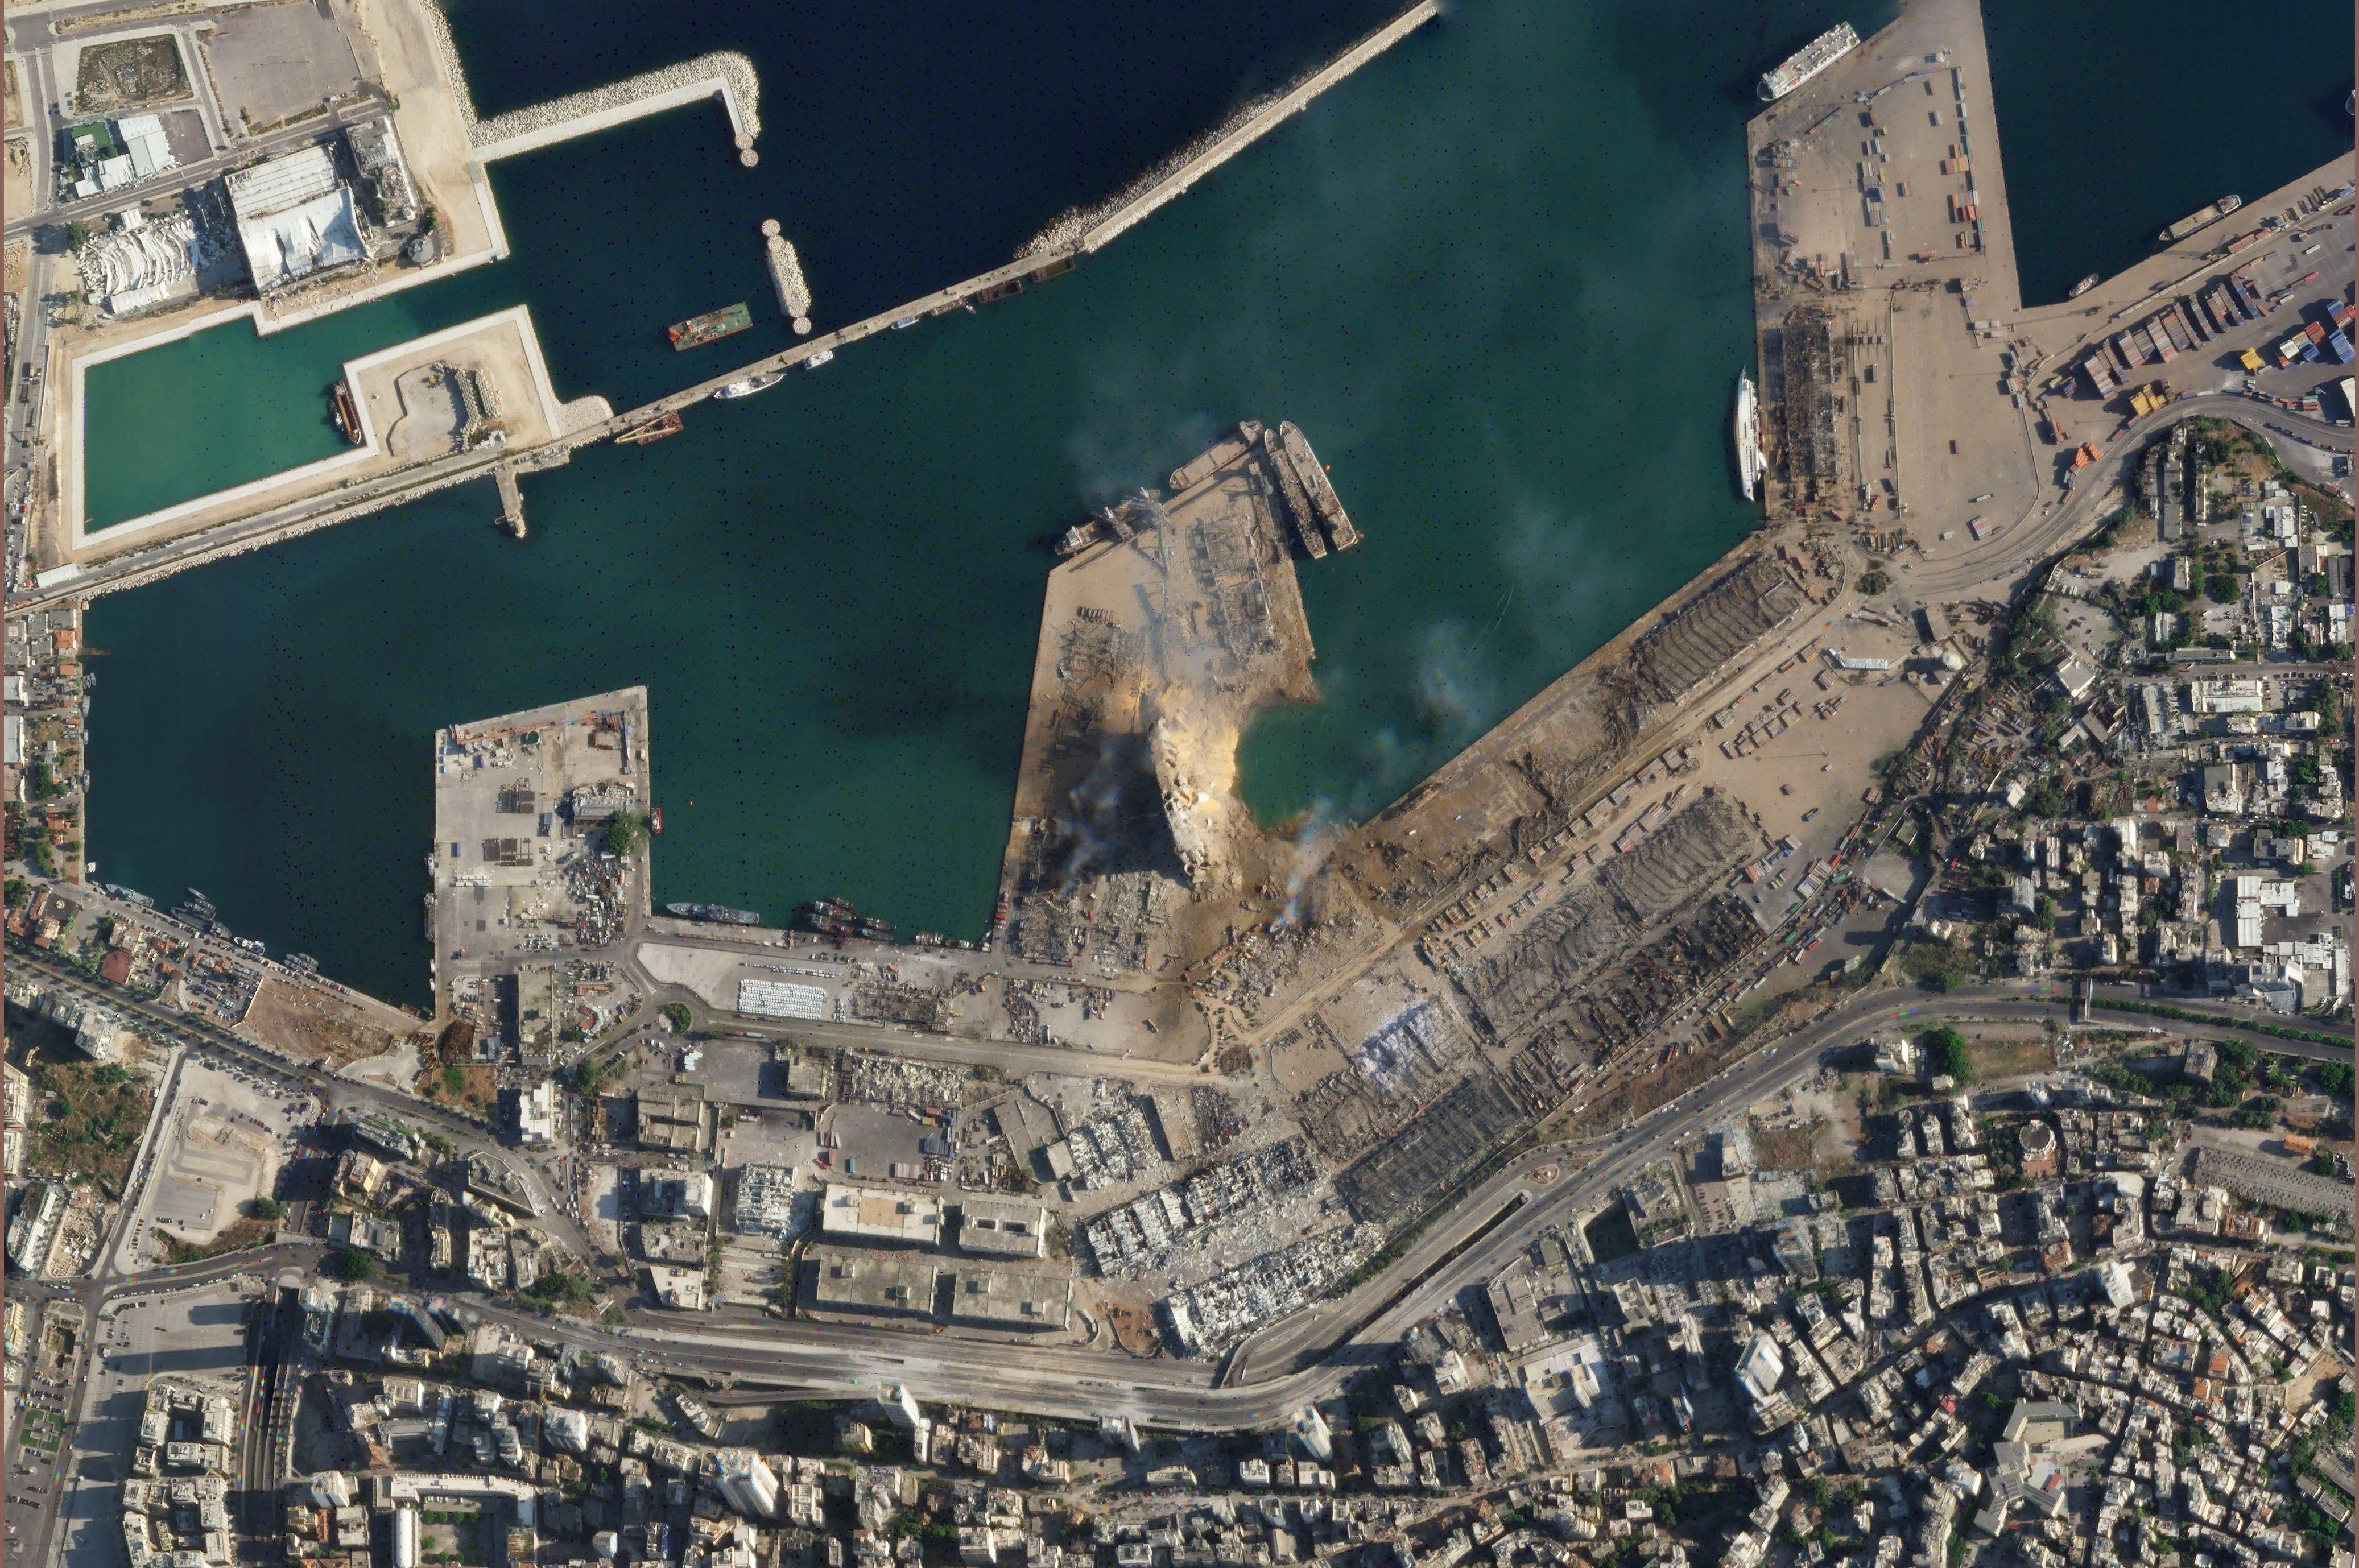 This satellite image taken on Wednesday Aug. 5, 2020 shows the port of Beirut and the surrounding area in Lebanon following a massive blast on Tuesday. Residents of Beirut confronted a scene of utter devastation a day after a massive explosion at the port rippled across the Lebanese capital, killing at least 100 people, wounding thousands and leaving entire city blocks blanketed with glass and rubble.